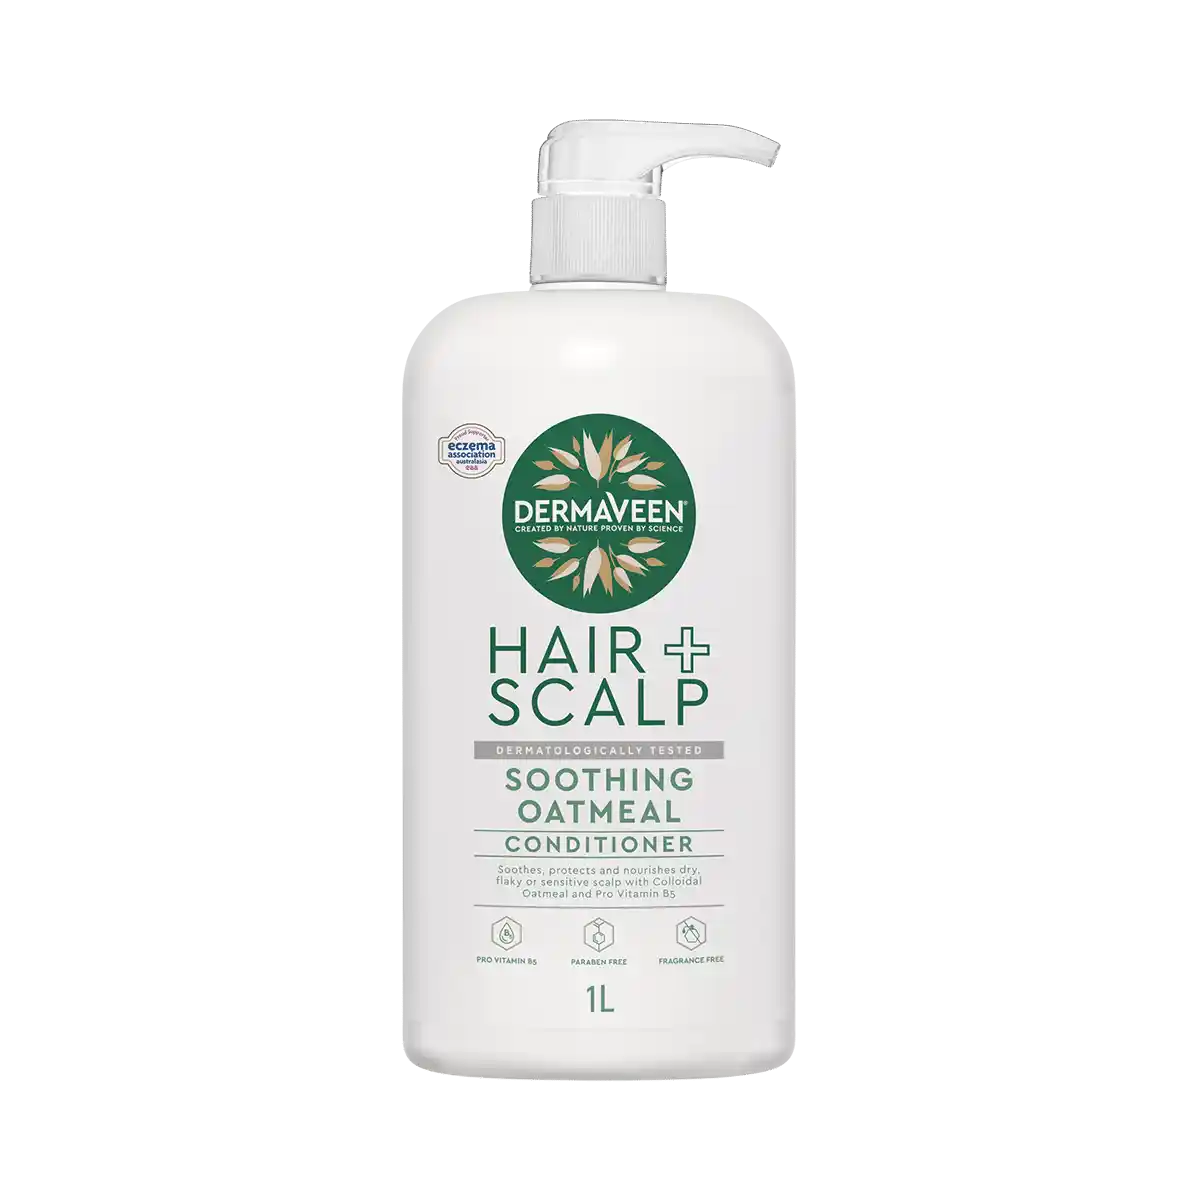 Hair + Scalp Soothing Oatmeal Conditioner